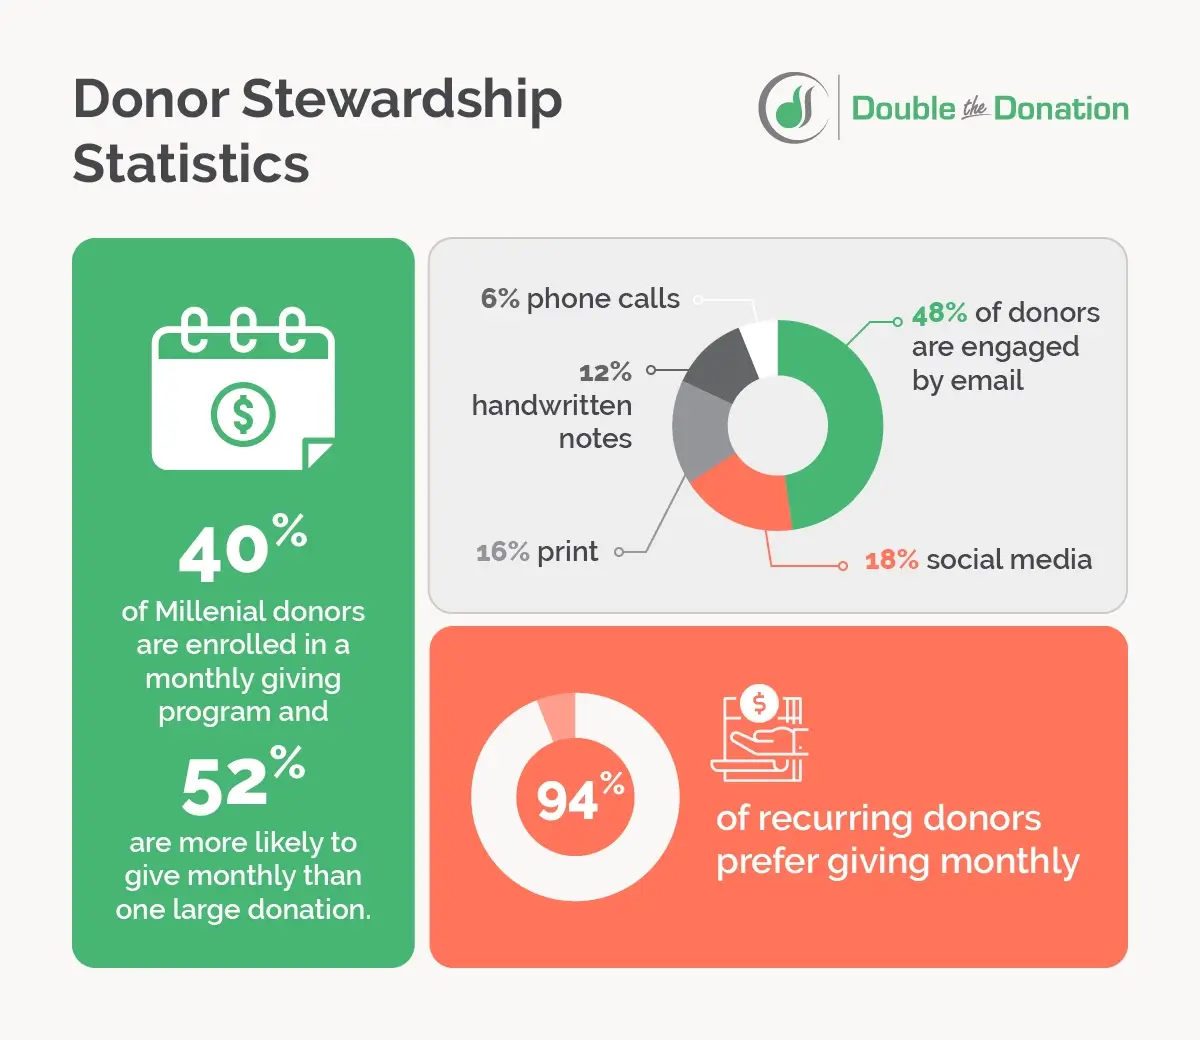 An infographic listing statistics about donor segments, communication channels, and timelines, which are discussed in the text below.